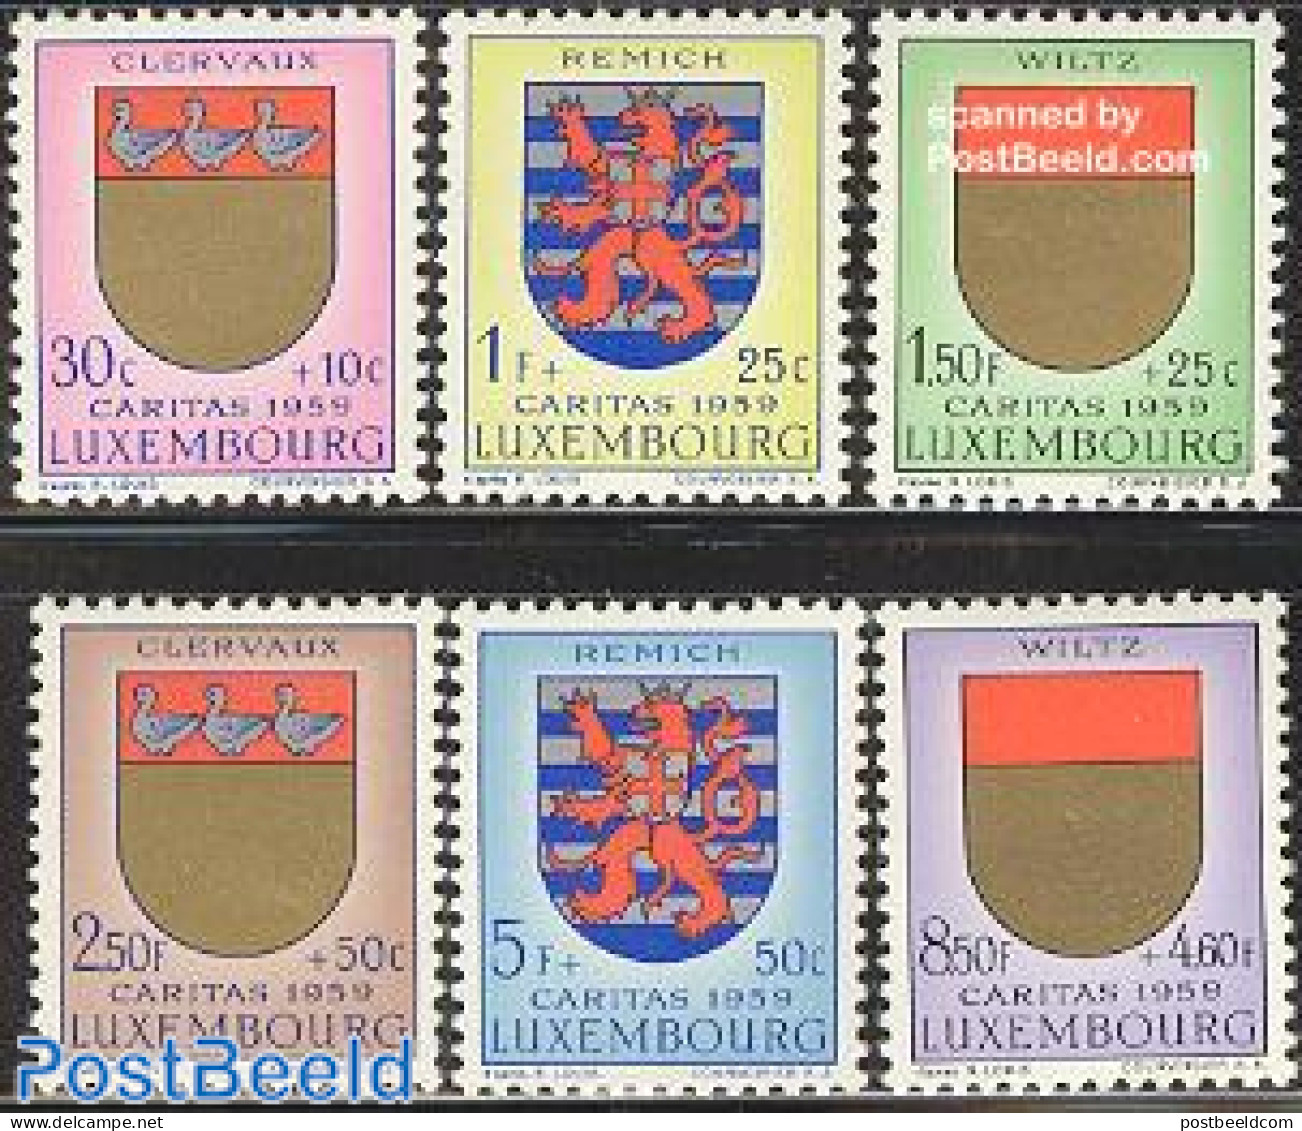 Luxemburg 1959 Caritas, Coat Of Arms 6v, Mint NH, History - Nature - Religion - Coat Of Arms - Ducks - Christmas - Unused Stamps